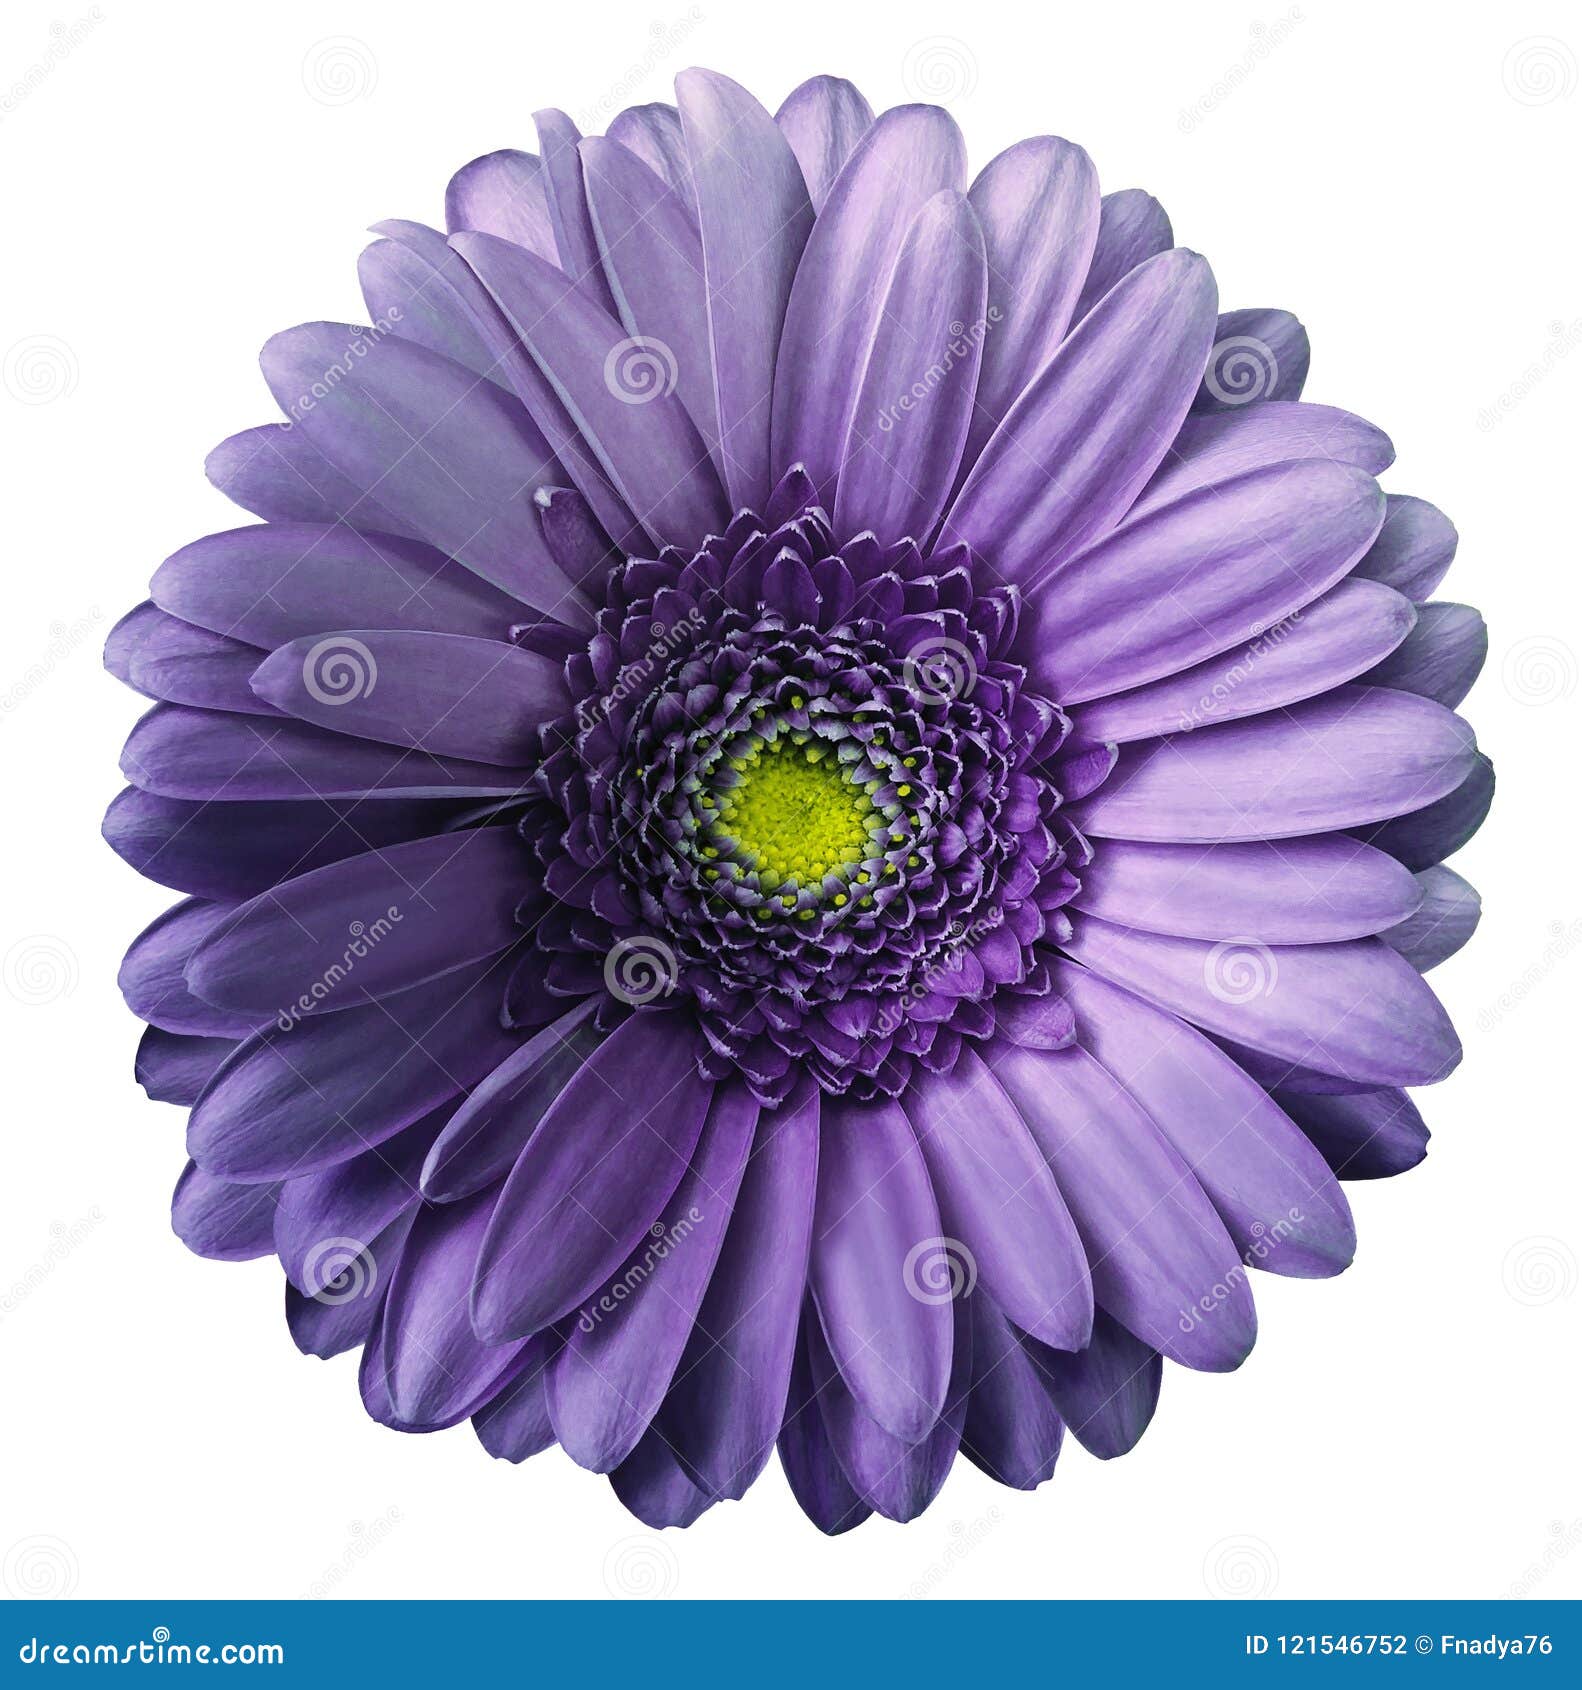 gerbera violet flower on white  background with clipping path. no shadows. closeup.